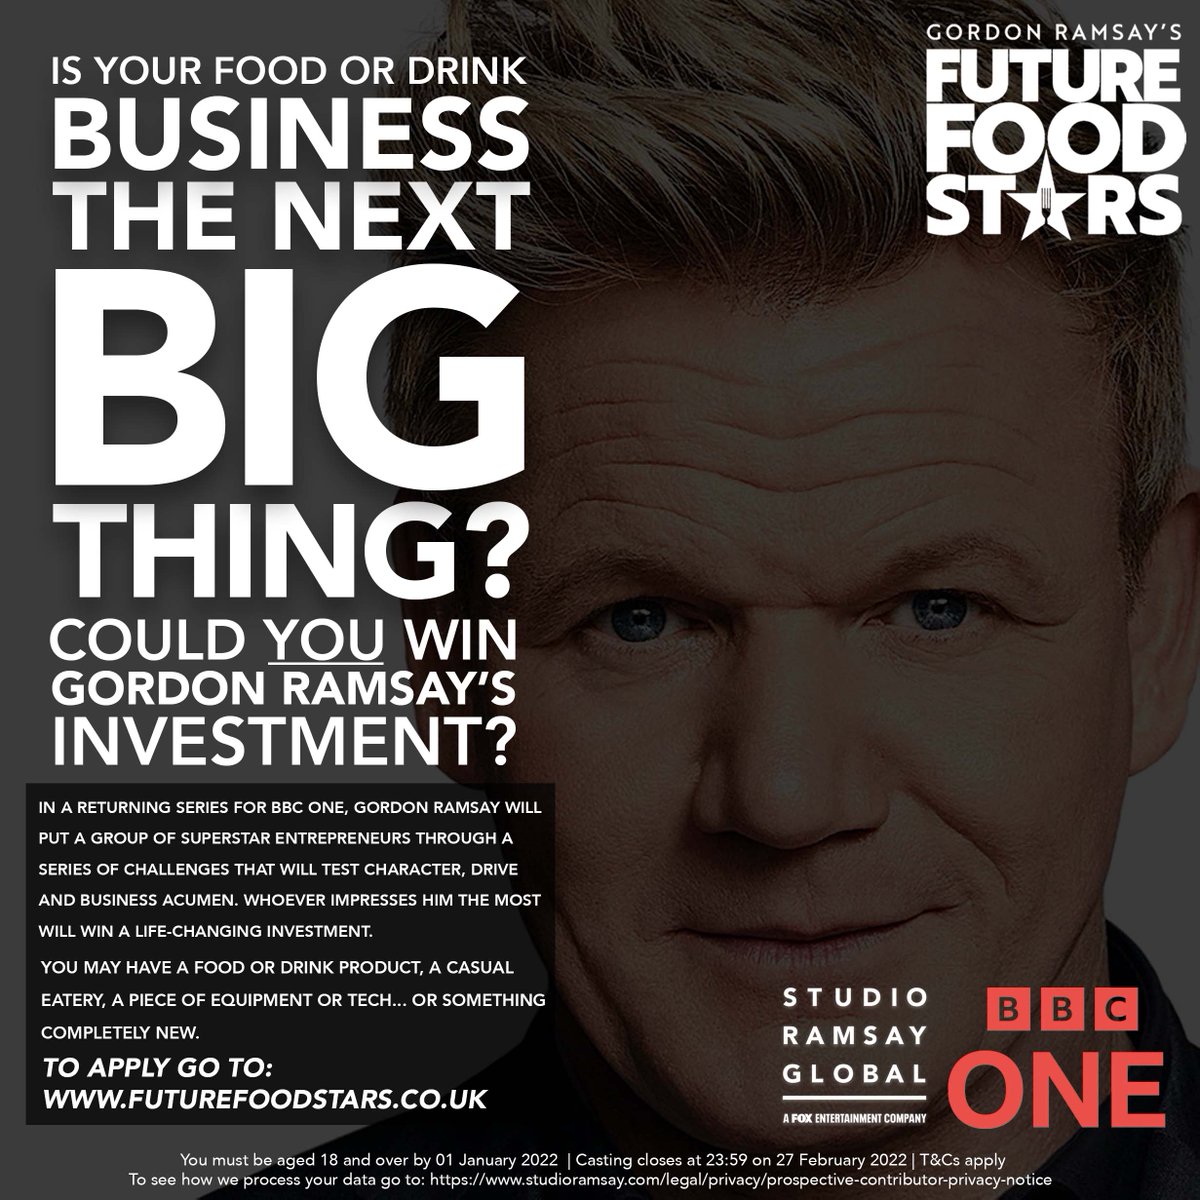 IS YOUR FOOD OR DRINK BUSINESS THE NEXT BIG THING?

The BBC are currently looking for food & drink entrepreneurs to take part in a returning BBC One competition series fronted by Gordon Ramsay. 

https://t.co/xUskMAl6kZ https://t.co/GhWEYQbeLG